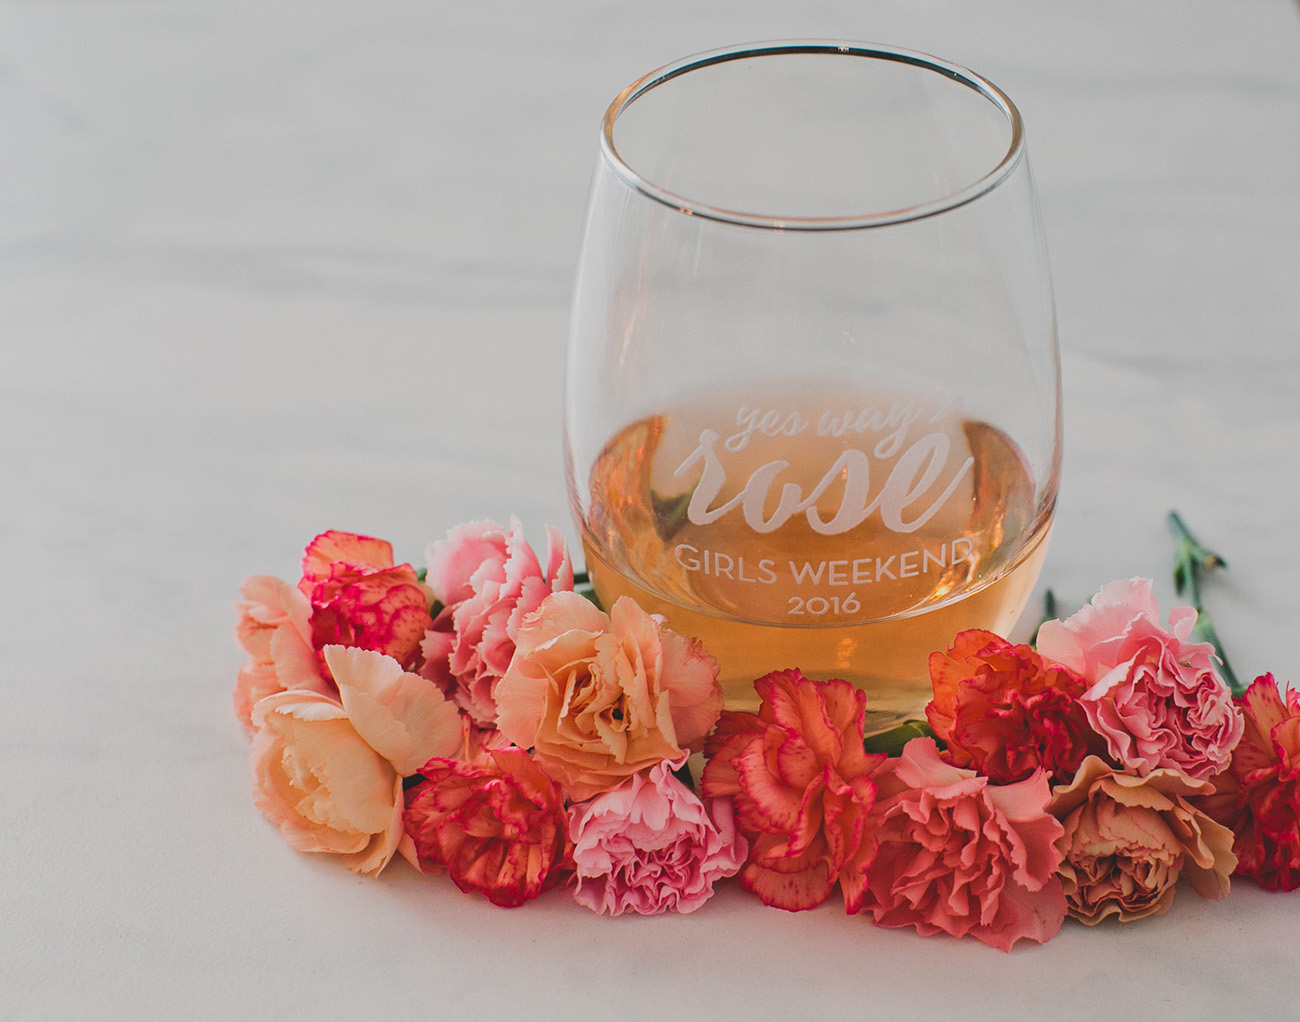 rose wine glasses for a bachelorette party